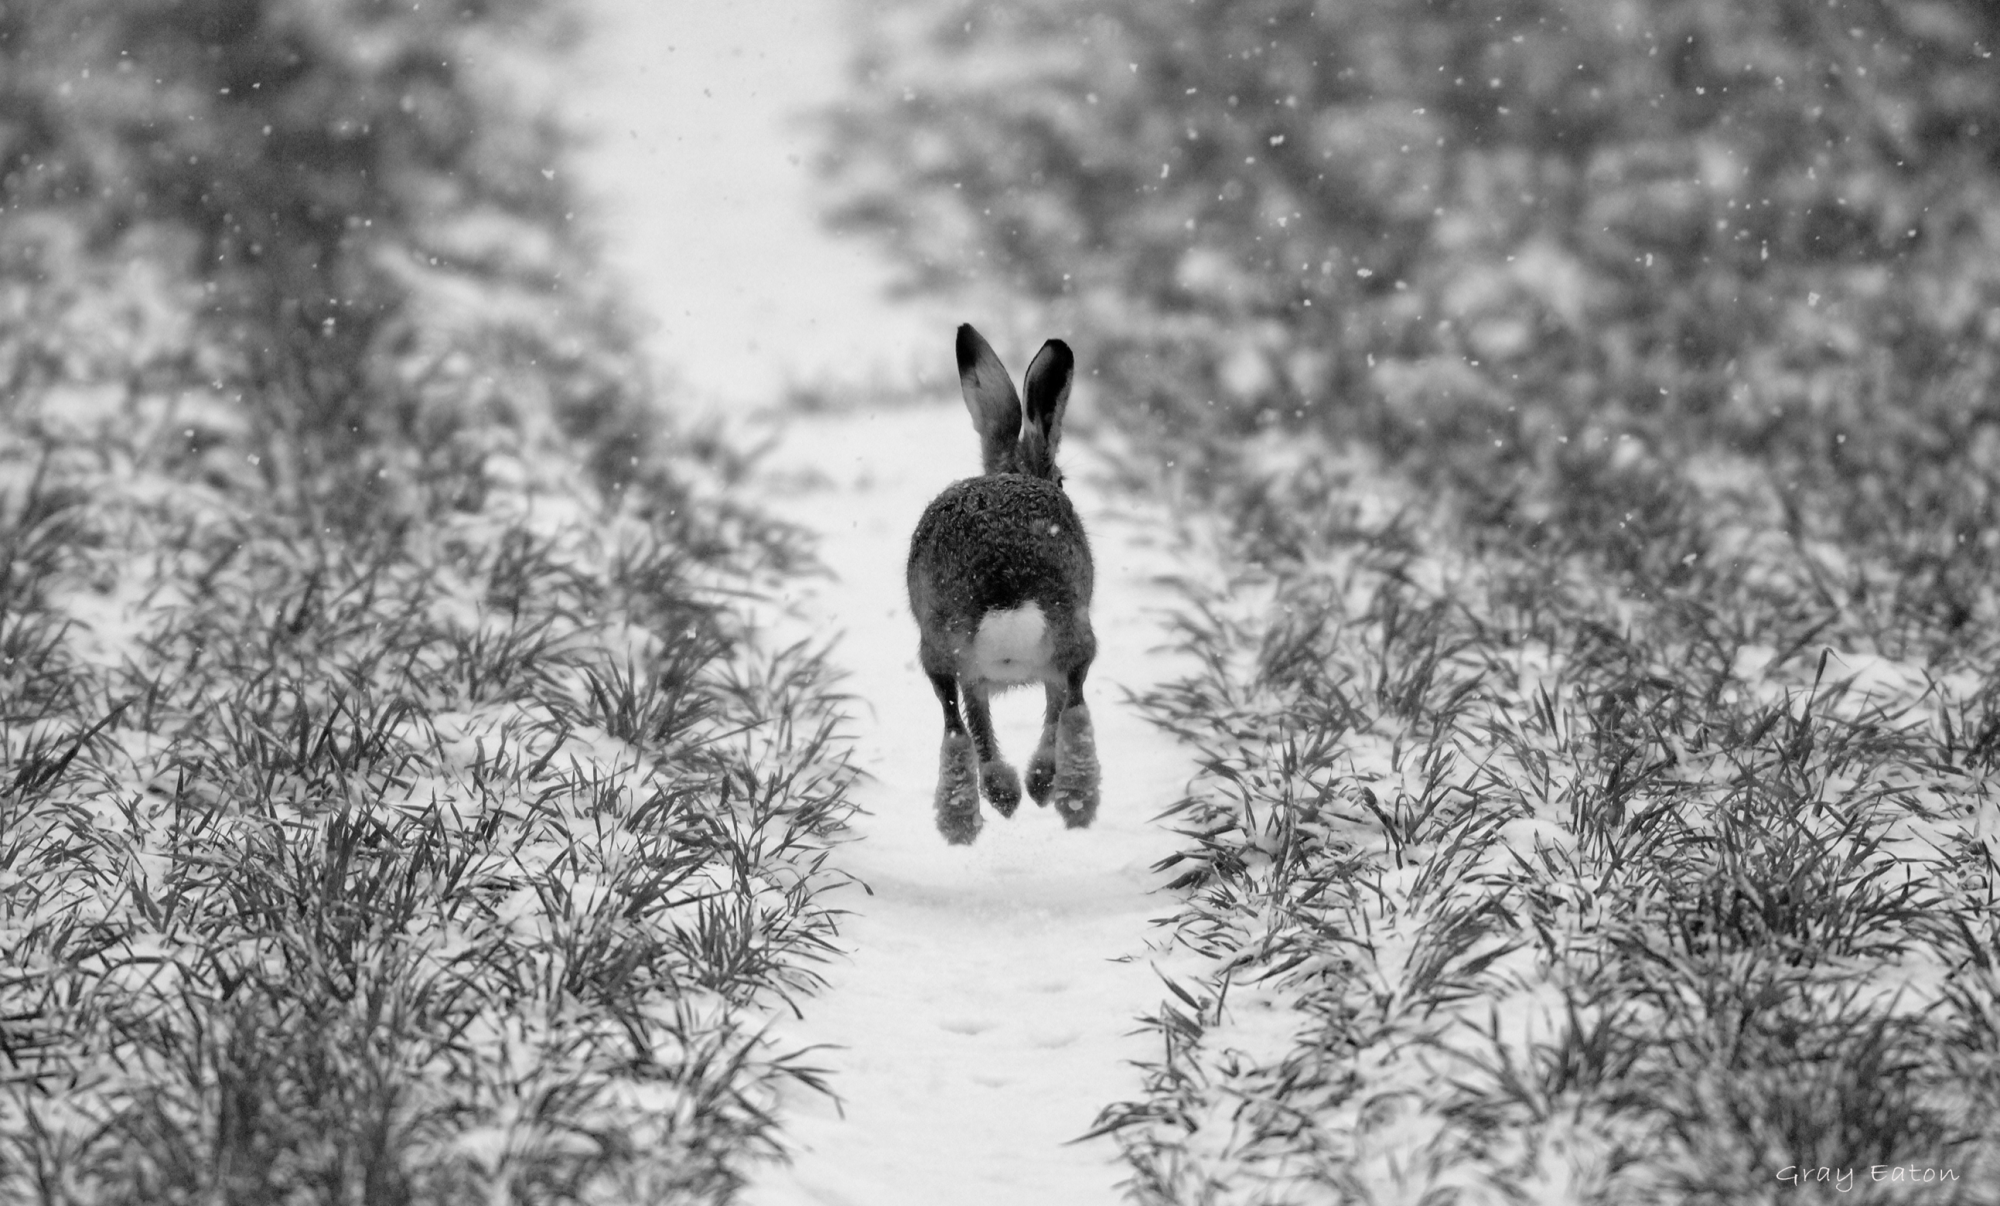 Gray Eaton Photography, Hare, Winter, Snow, countryside , black and white, monochrome